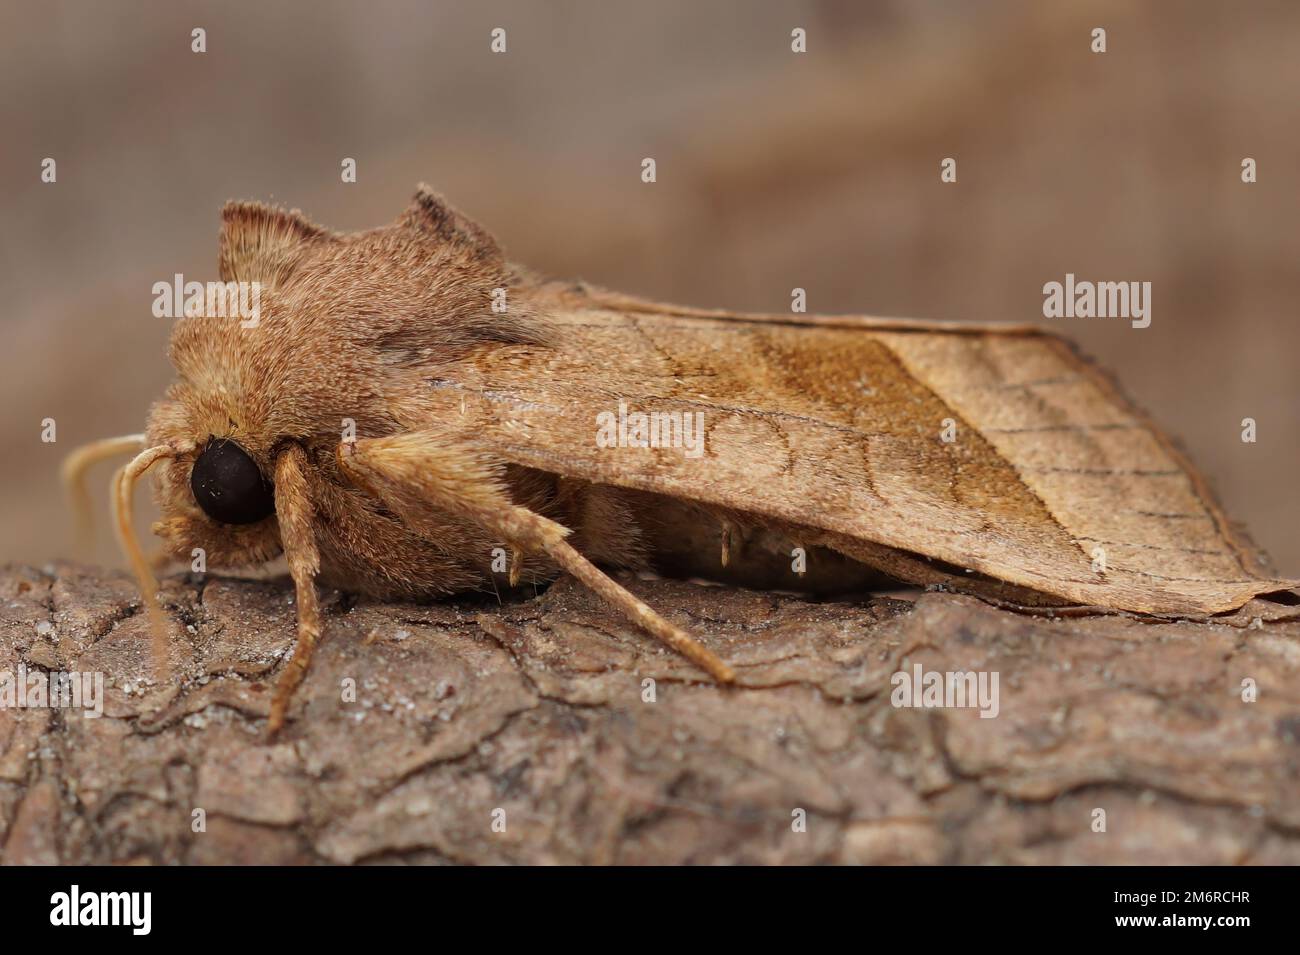 Natural closeup on the lightbrown rosy rustic potato skin borer owlet moth ,Hydraecia micacea sitting on wood Stock Photo